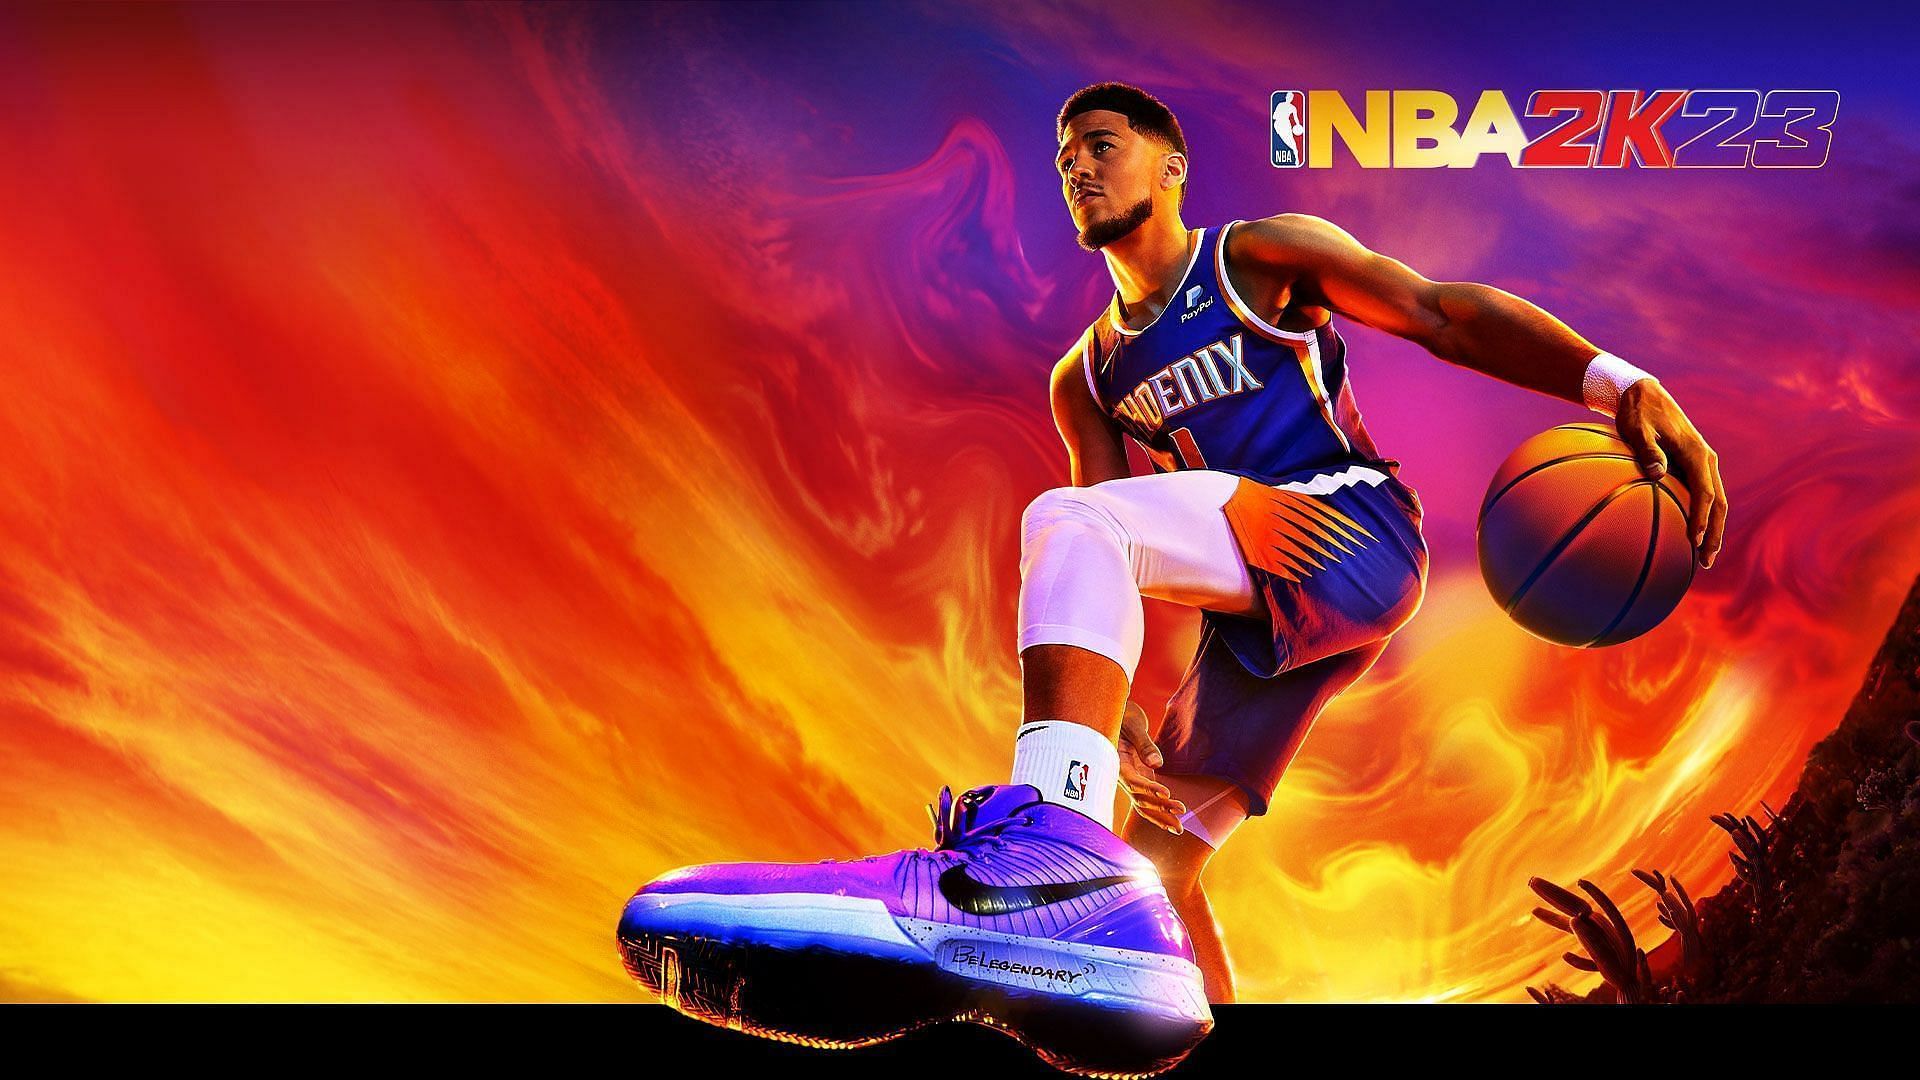 NBA 2K23 introduced a huge new update recently.